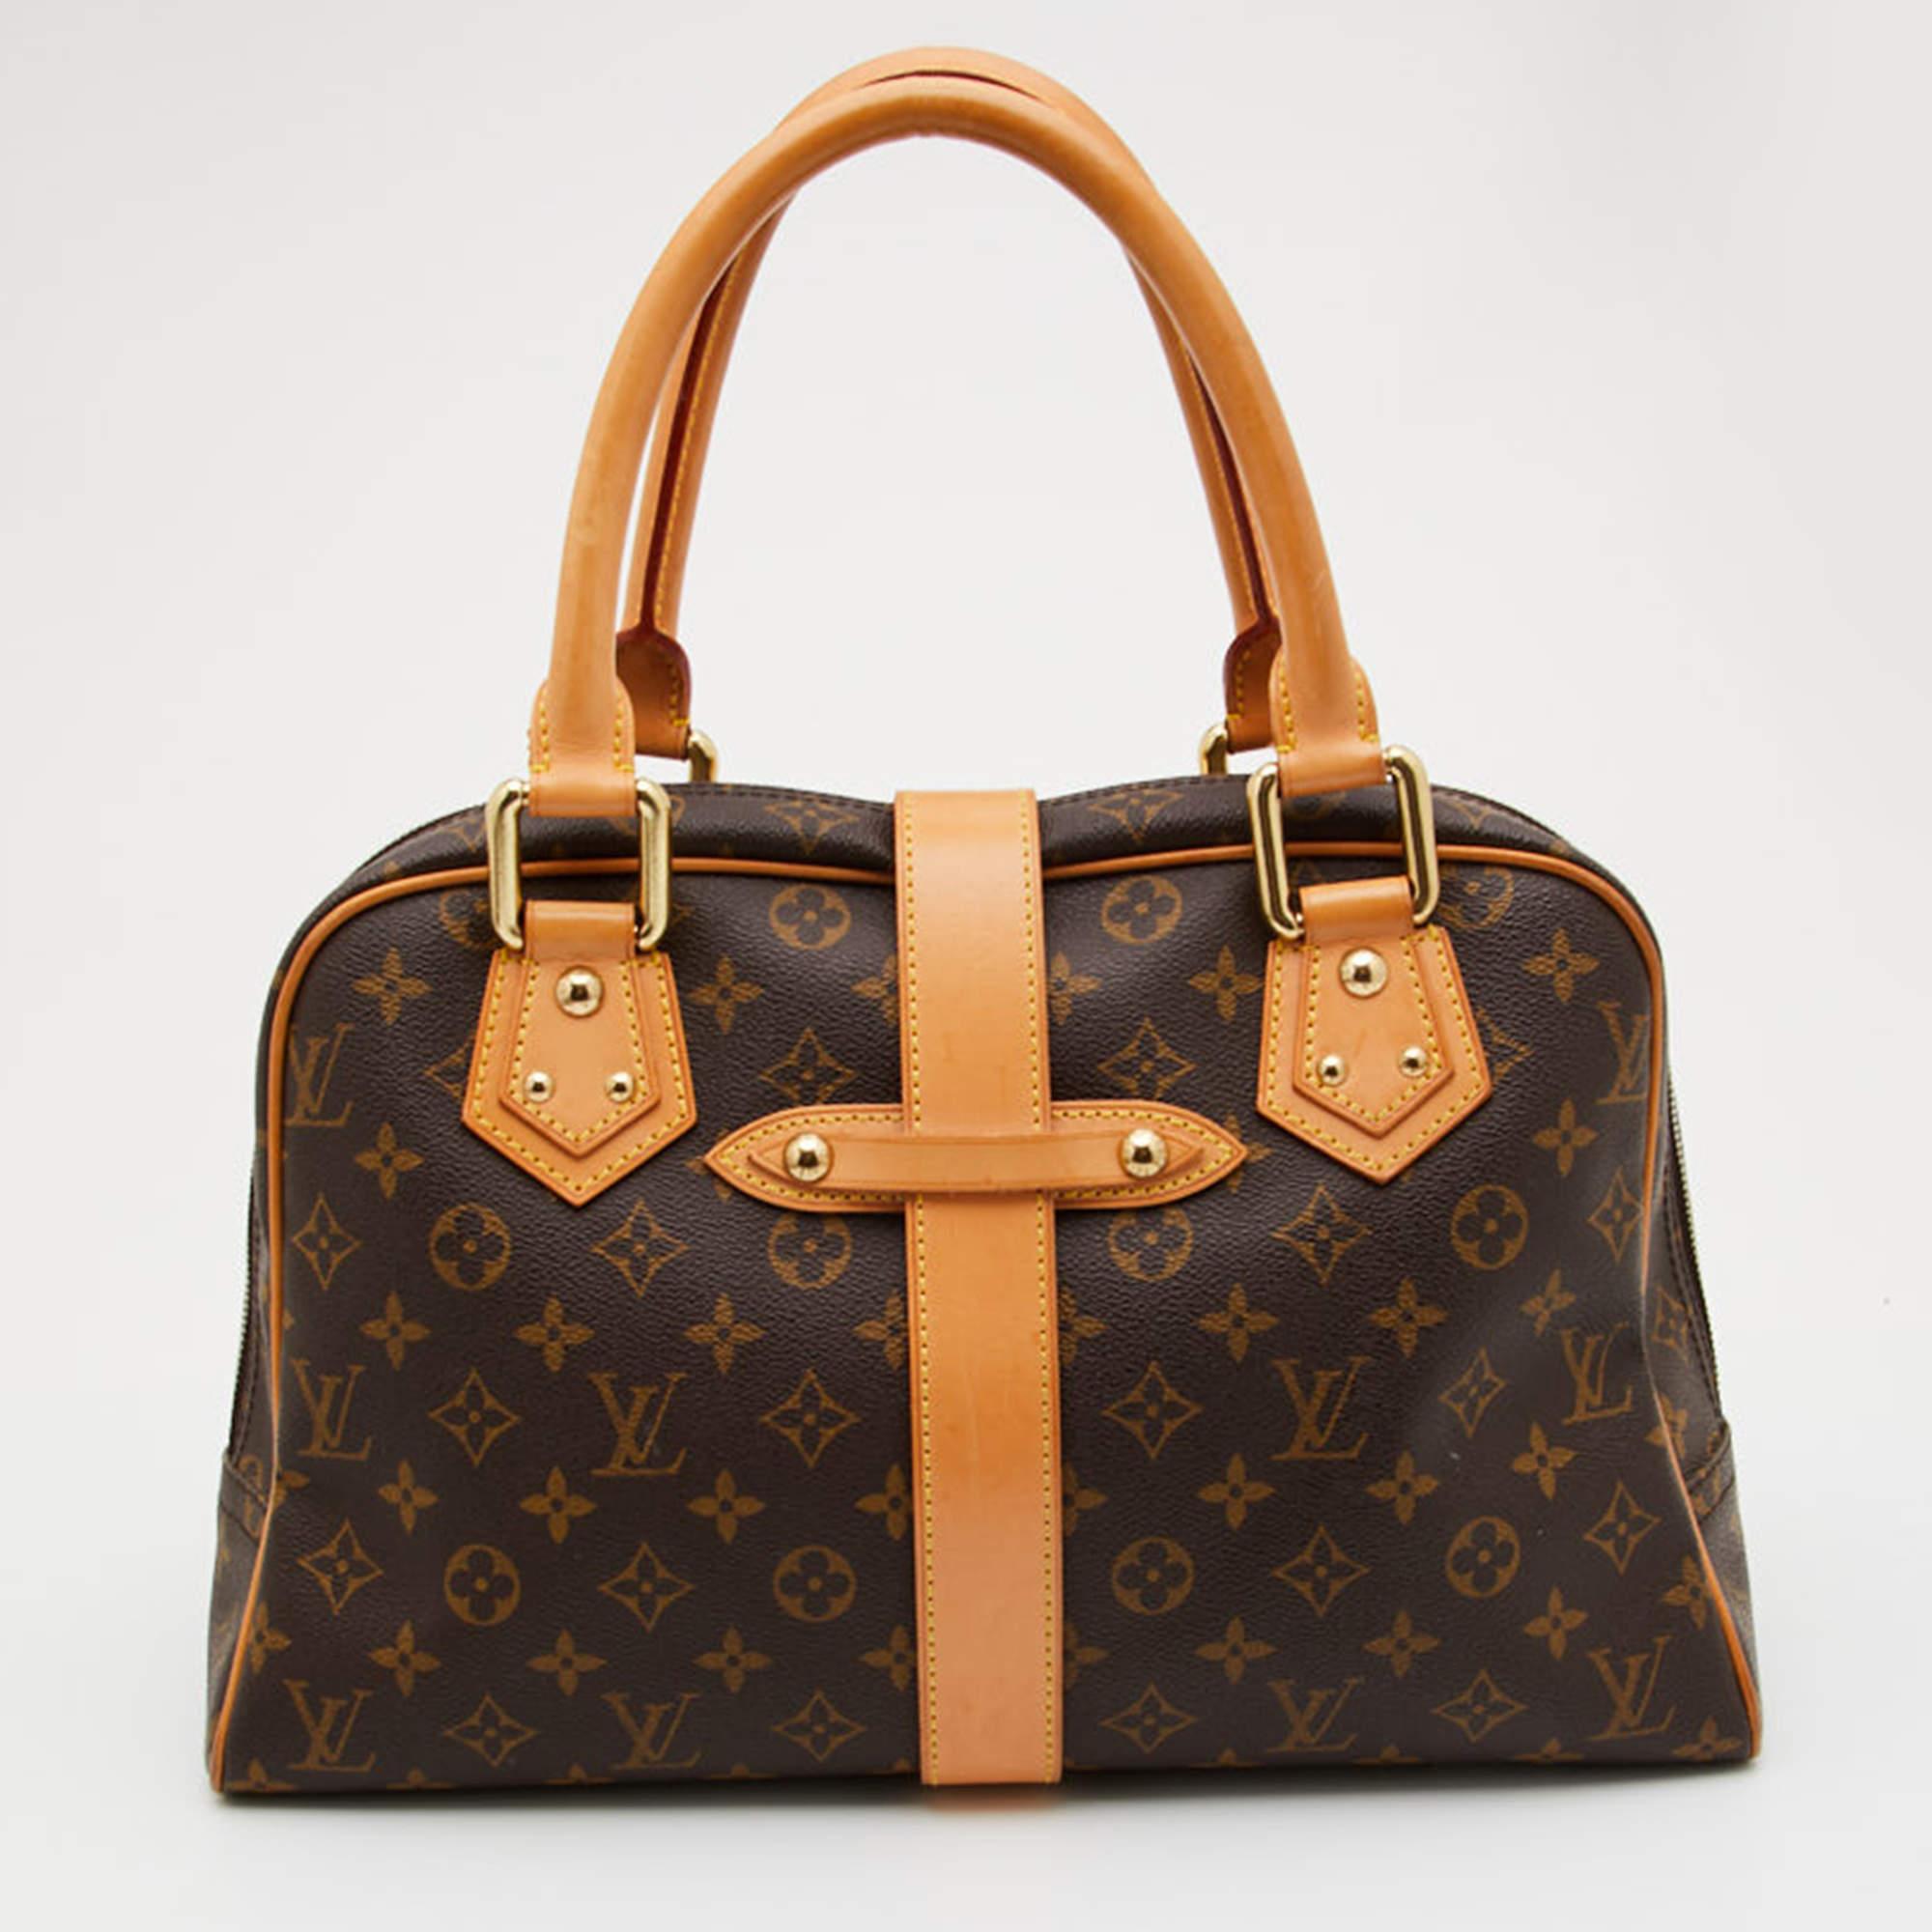 Complete your look with this gorgeous Manhattan GM Bag by Louis Vuitton. The bag has been crafted from signature Monogram canvas and lined with Alcantara on the insides. It is equipped with two push-lock pockets at the front and a zip-top closure.